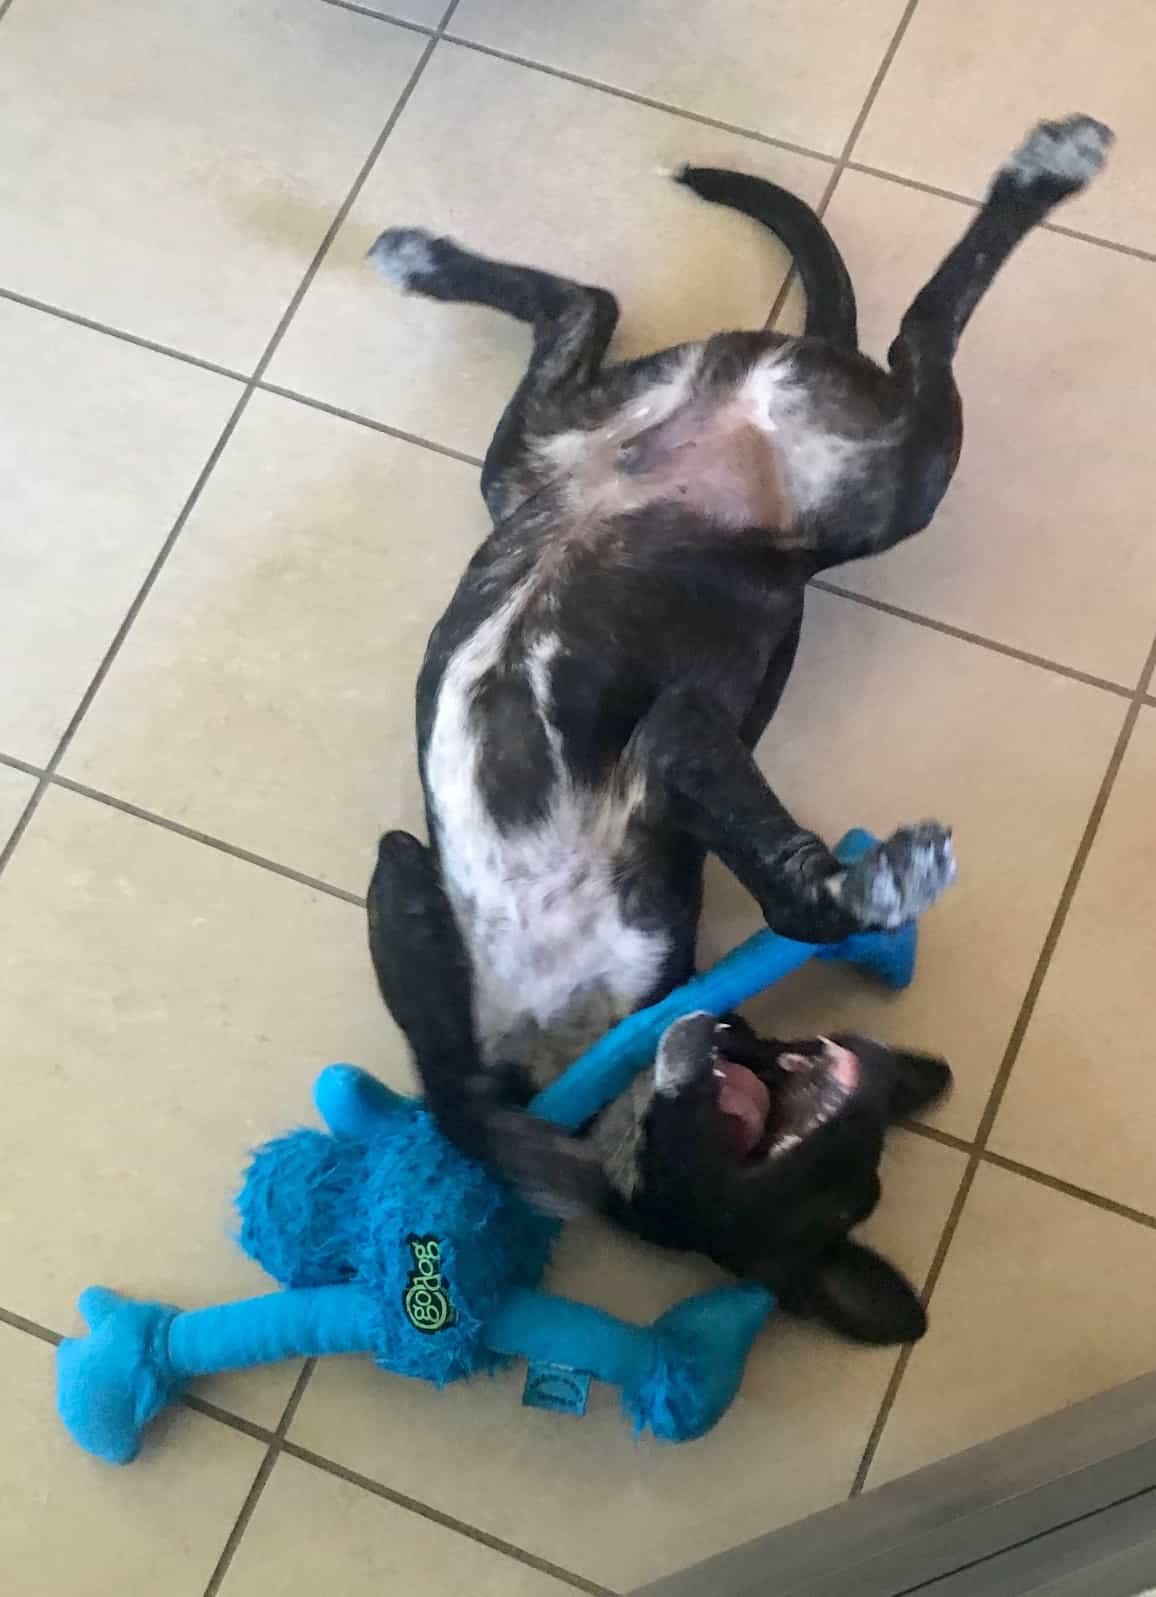 Puppy paying with blue sasquatch toy